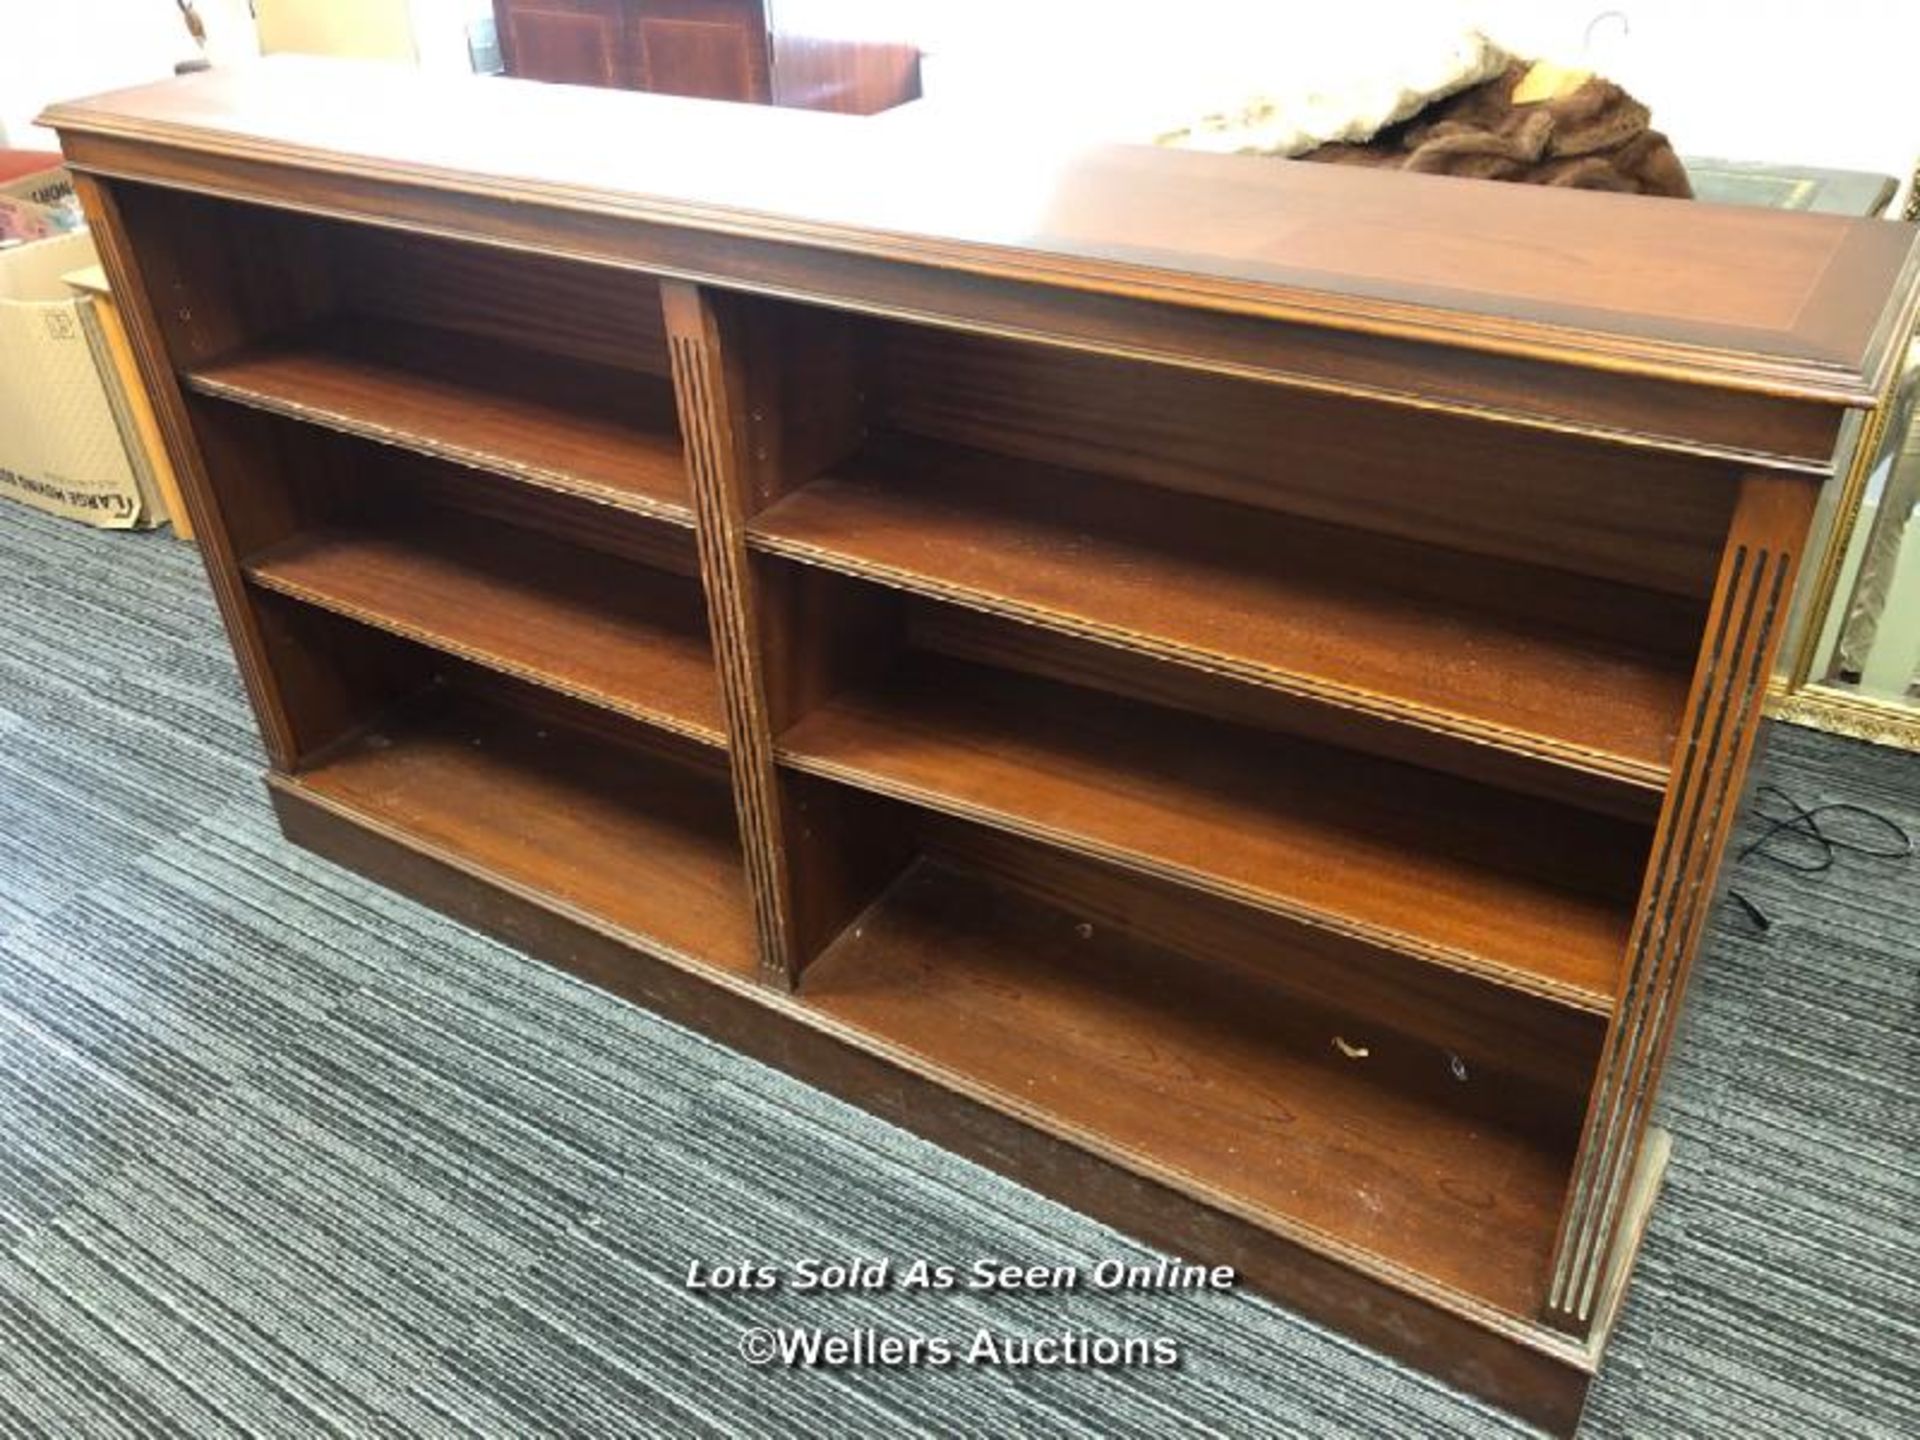 MID-RISE BOOKCASE WITH SIX SHELVES / COLLECTION LOCATION: GODALMING (GU6), FULL ADDRESS AND CONTACT